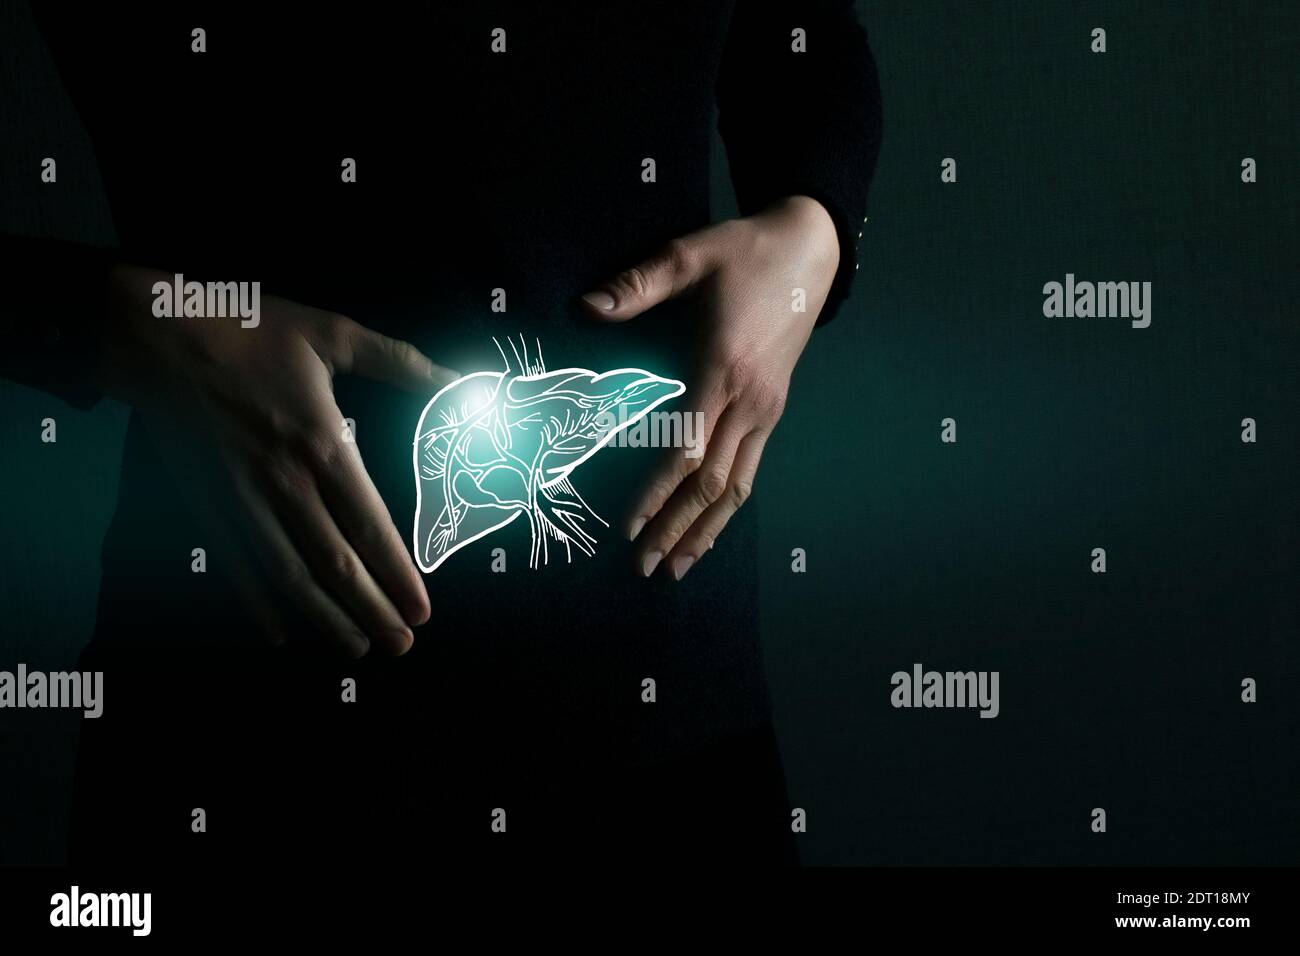 Illustration of liver detox with highlighted organ and contrast hands on dark background. Low key photo with copy space toned in dark green colors. Stock Photo